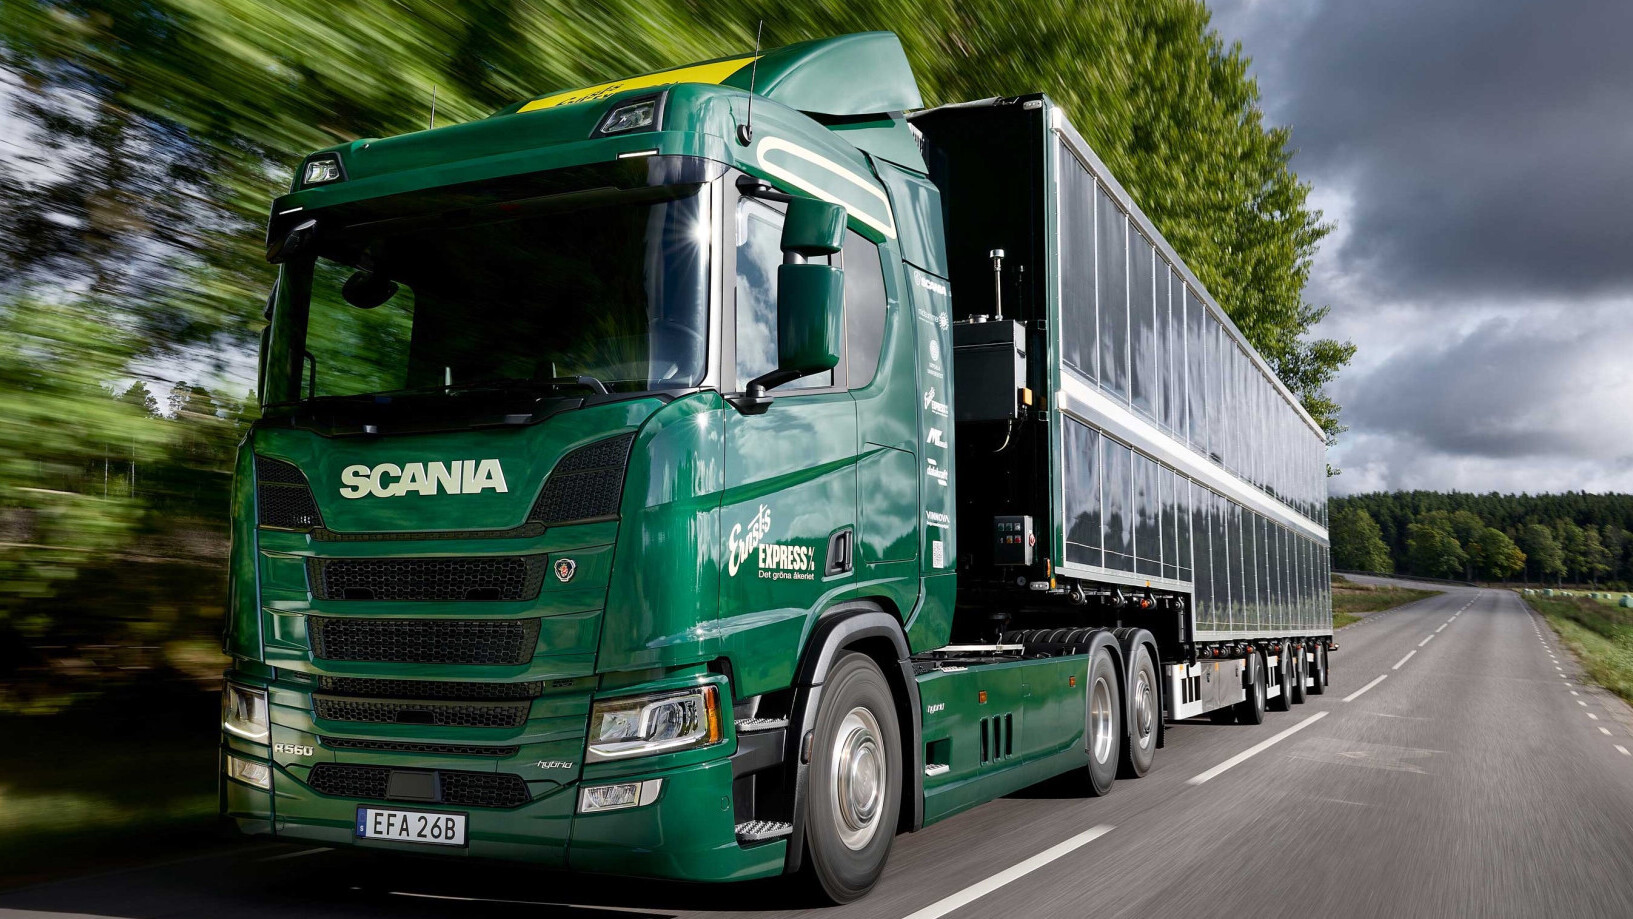 Sweden’s Scania unveils world’s first semi-truck covered in solar panels